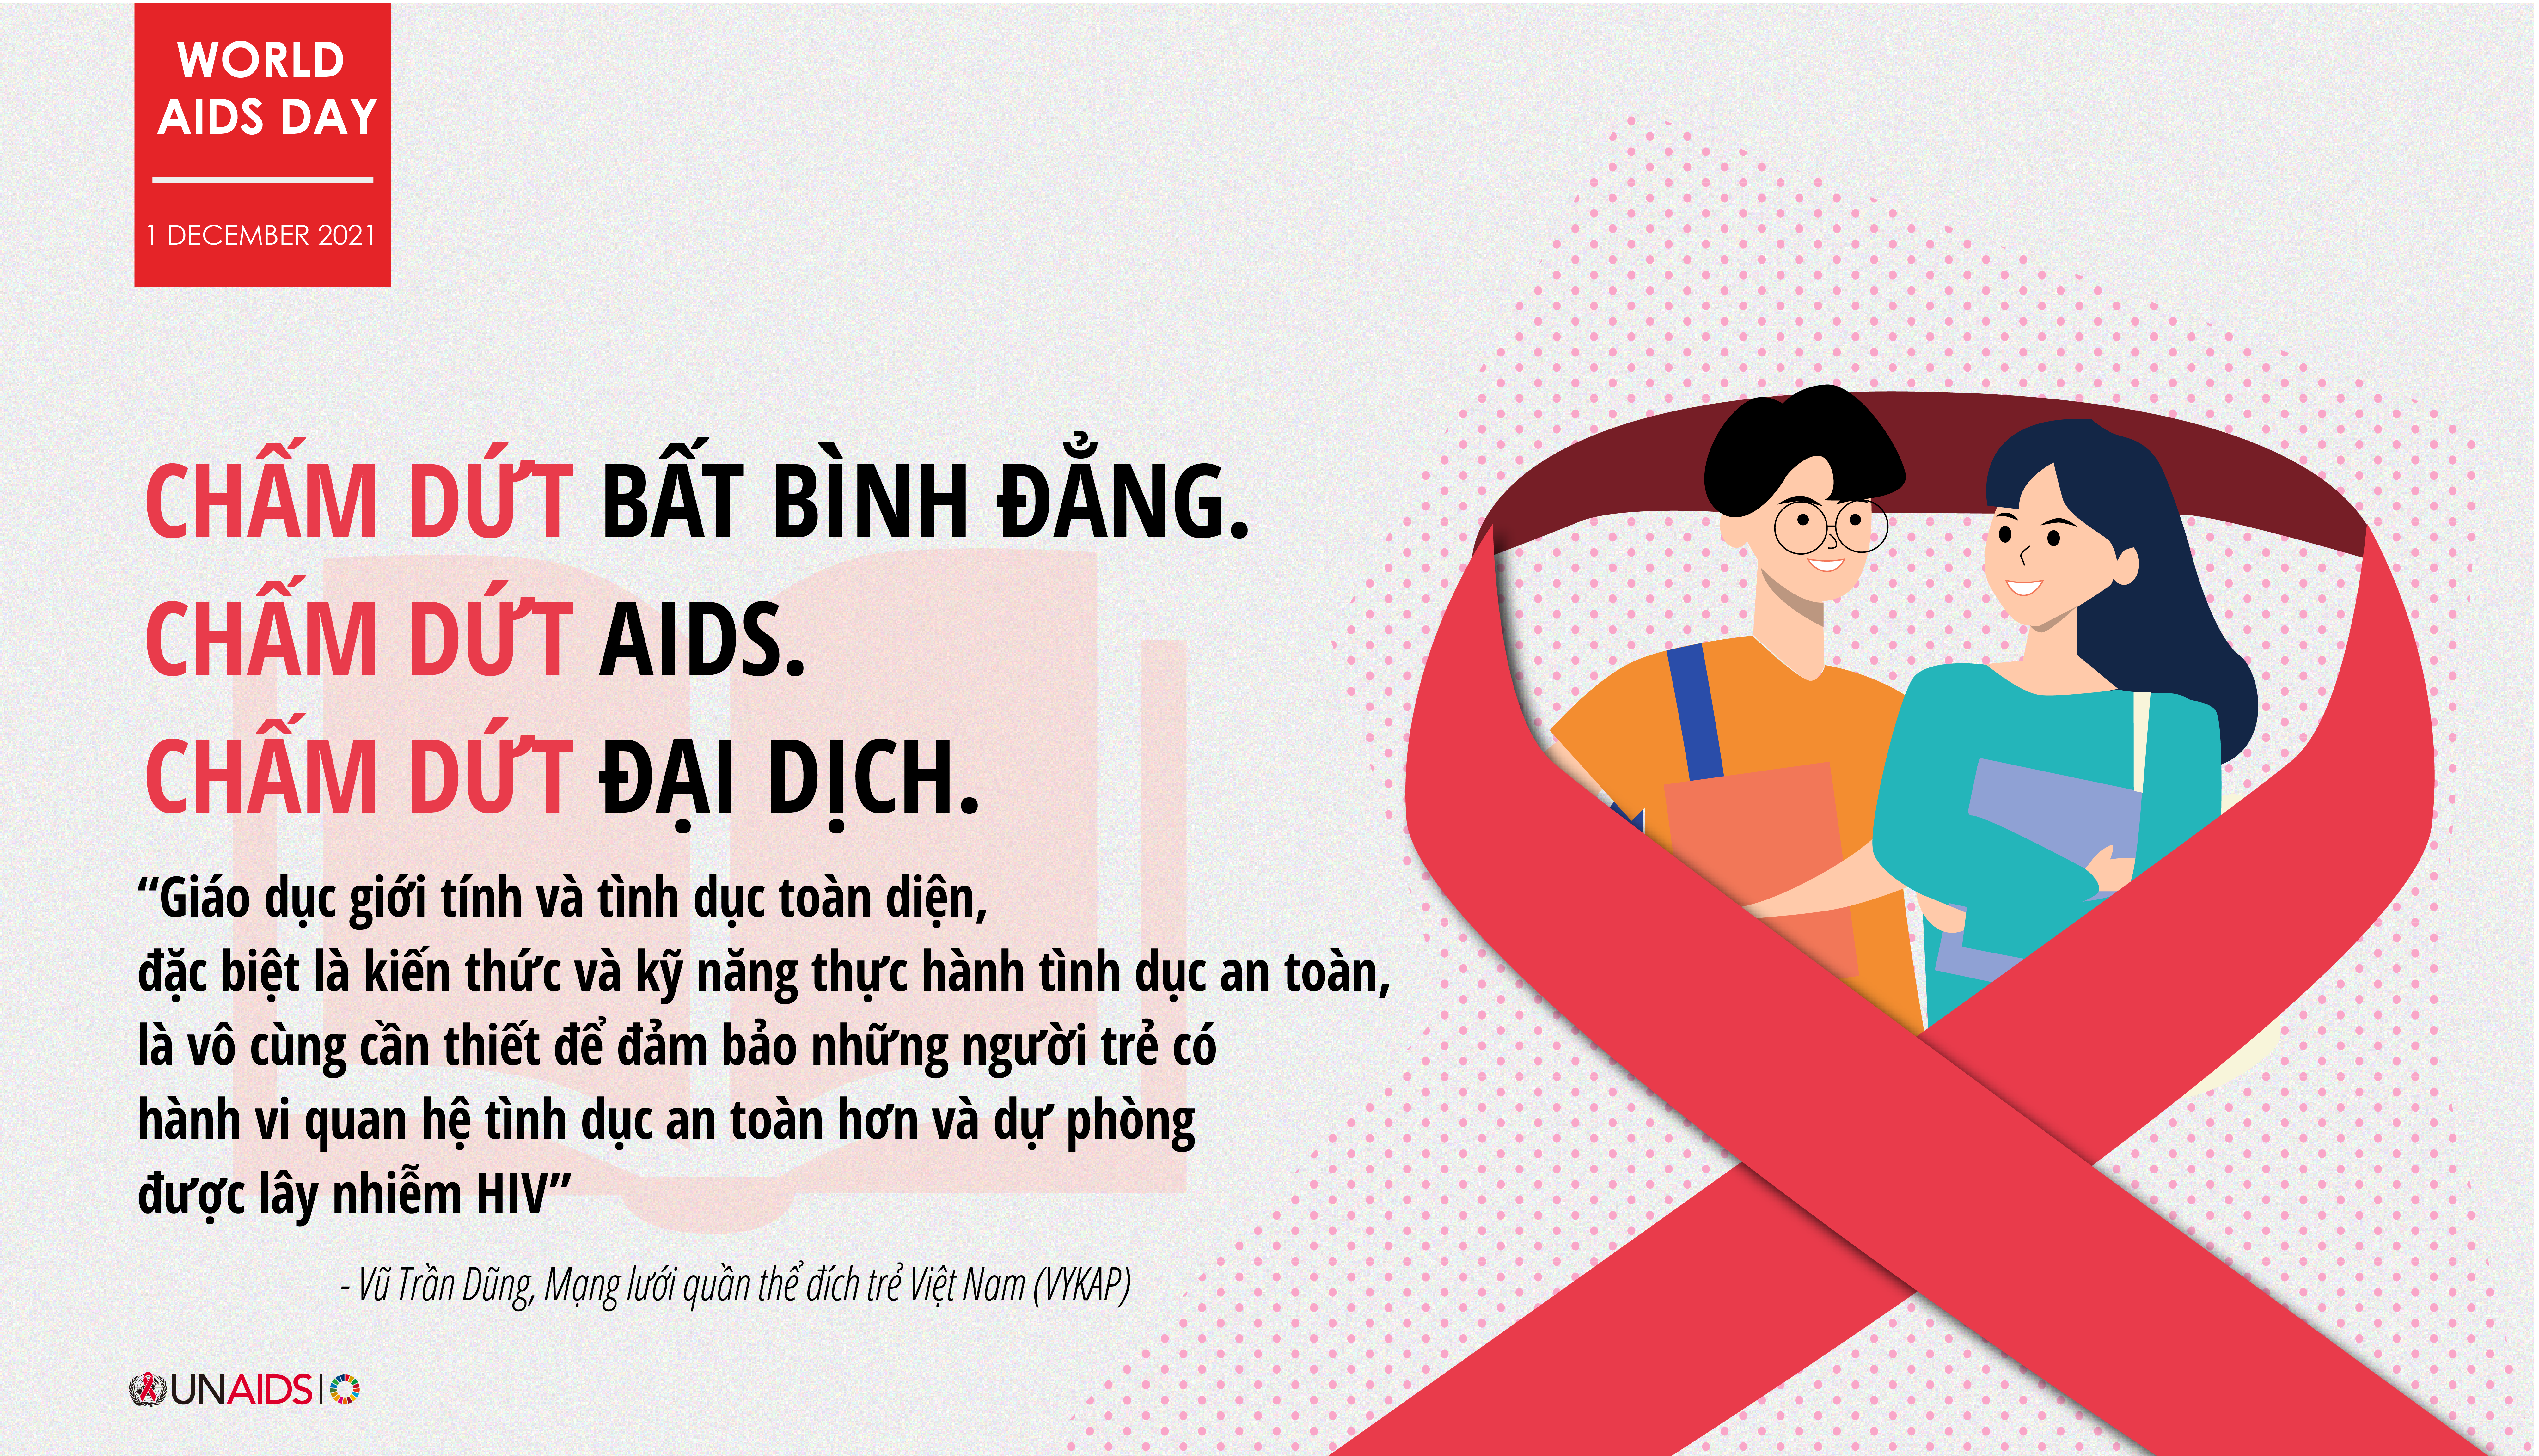 HIV risk is real due to gaps in sexual health and HIV literacy among young people in Viet Nam